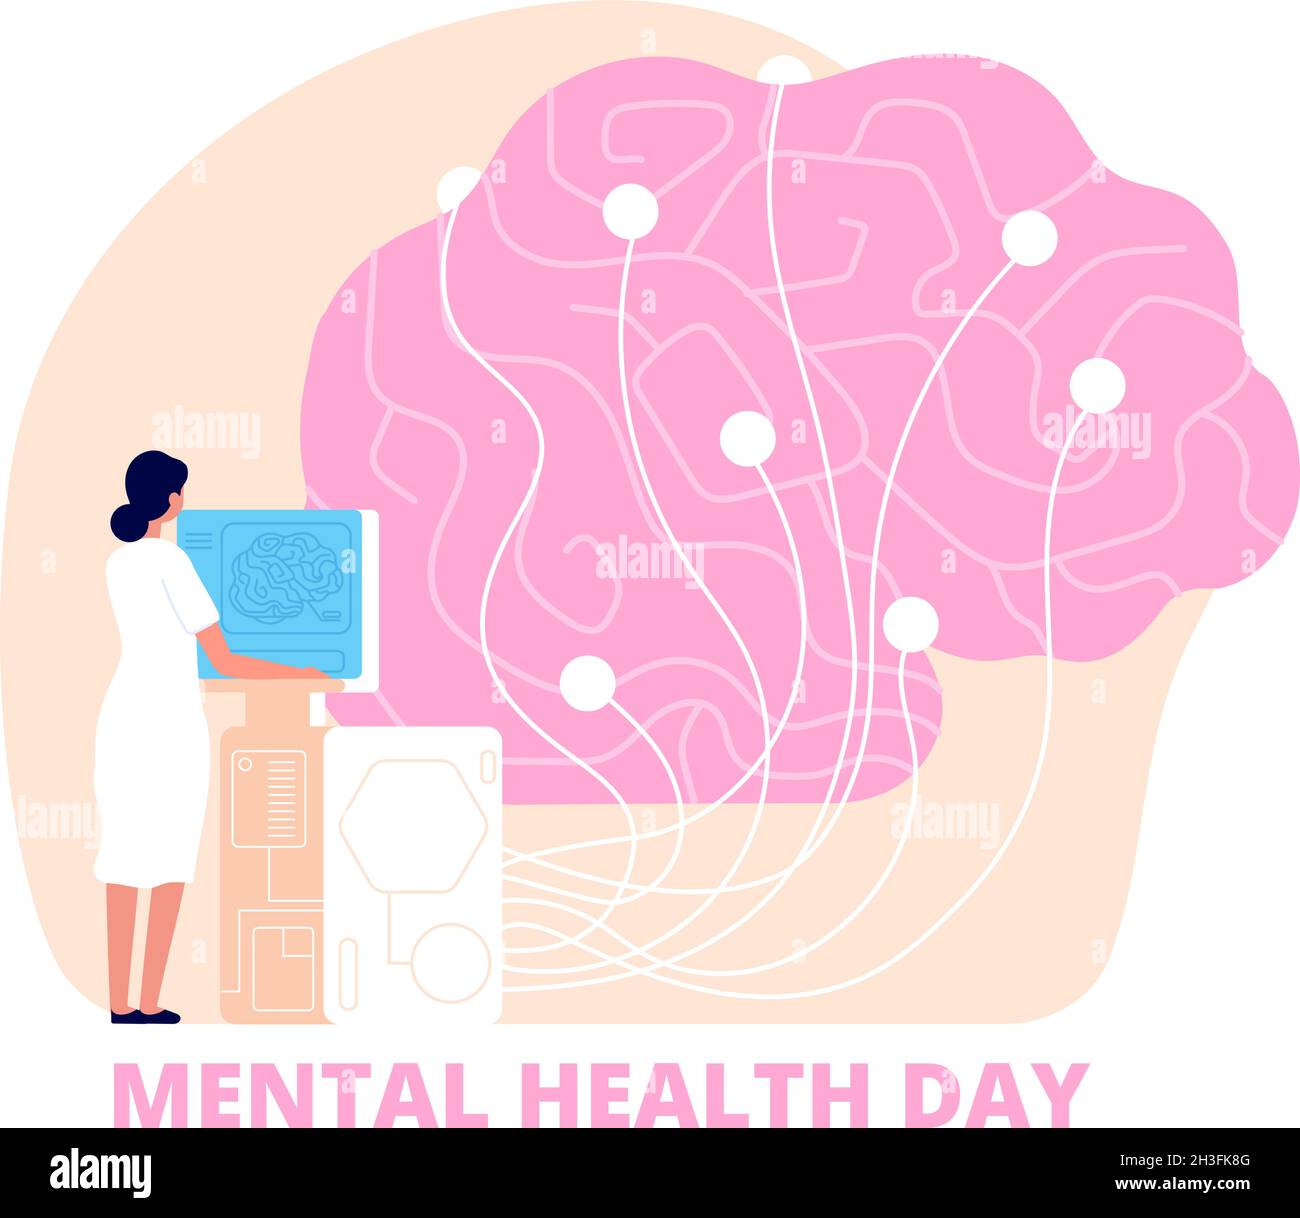 Mental health day. Healthcare, medical psychology poster. Doctor study human brain, mind care and research. Utter science vector background Stock Vector